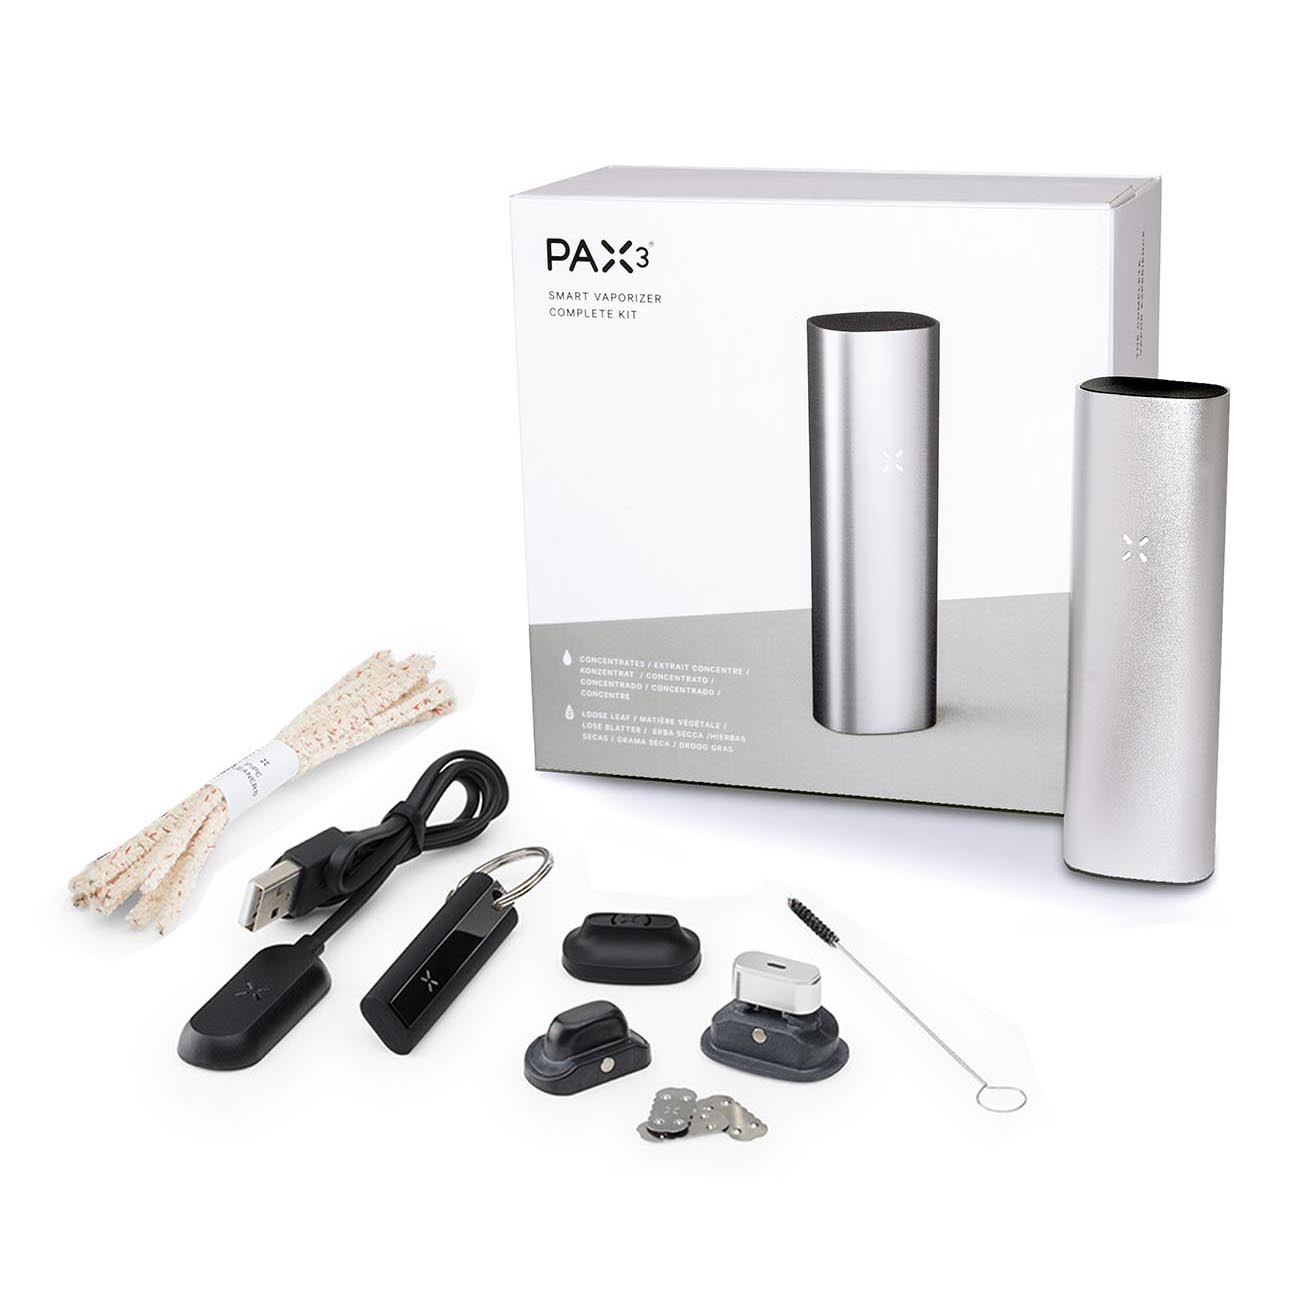 PAX 3 blue tooth version COMPLETE KIT 10 pack UPDATED